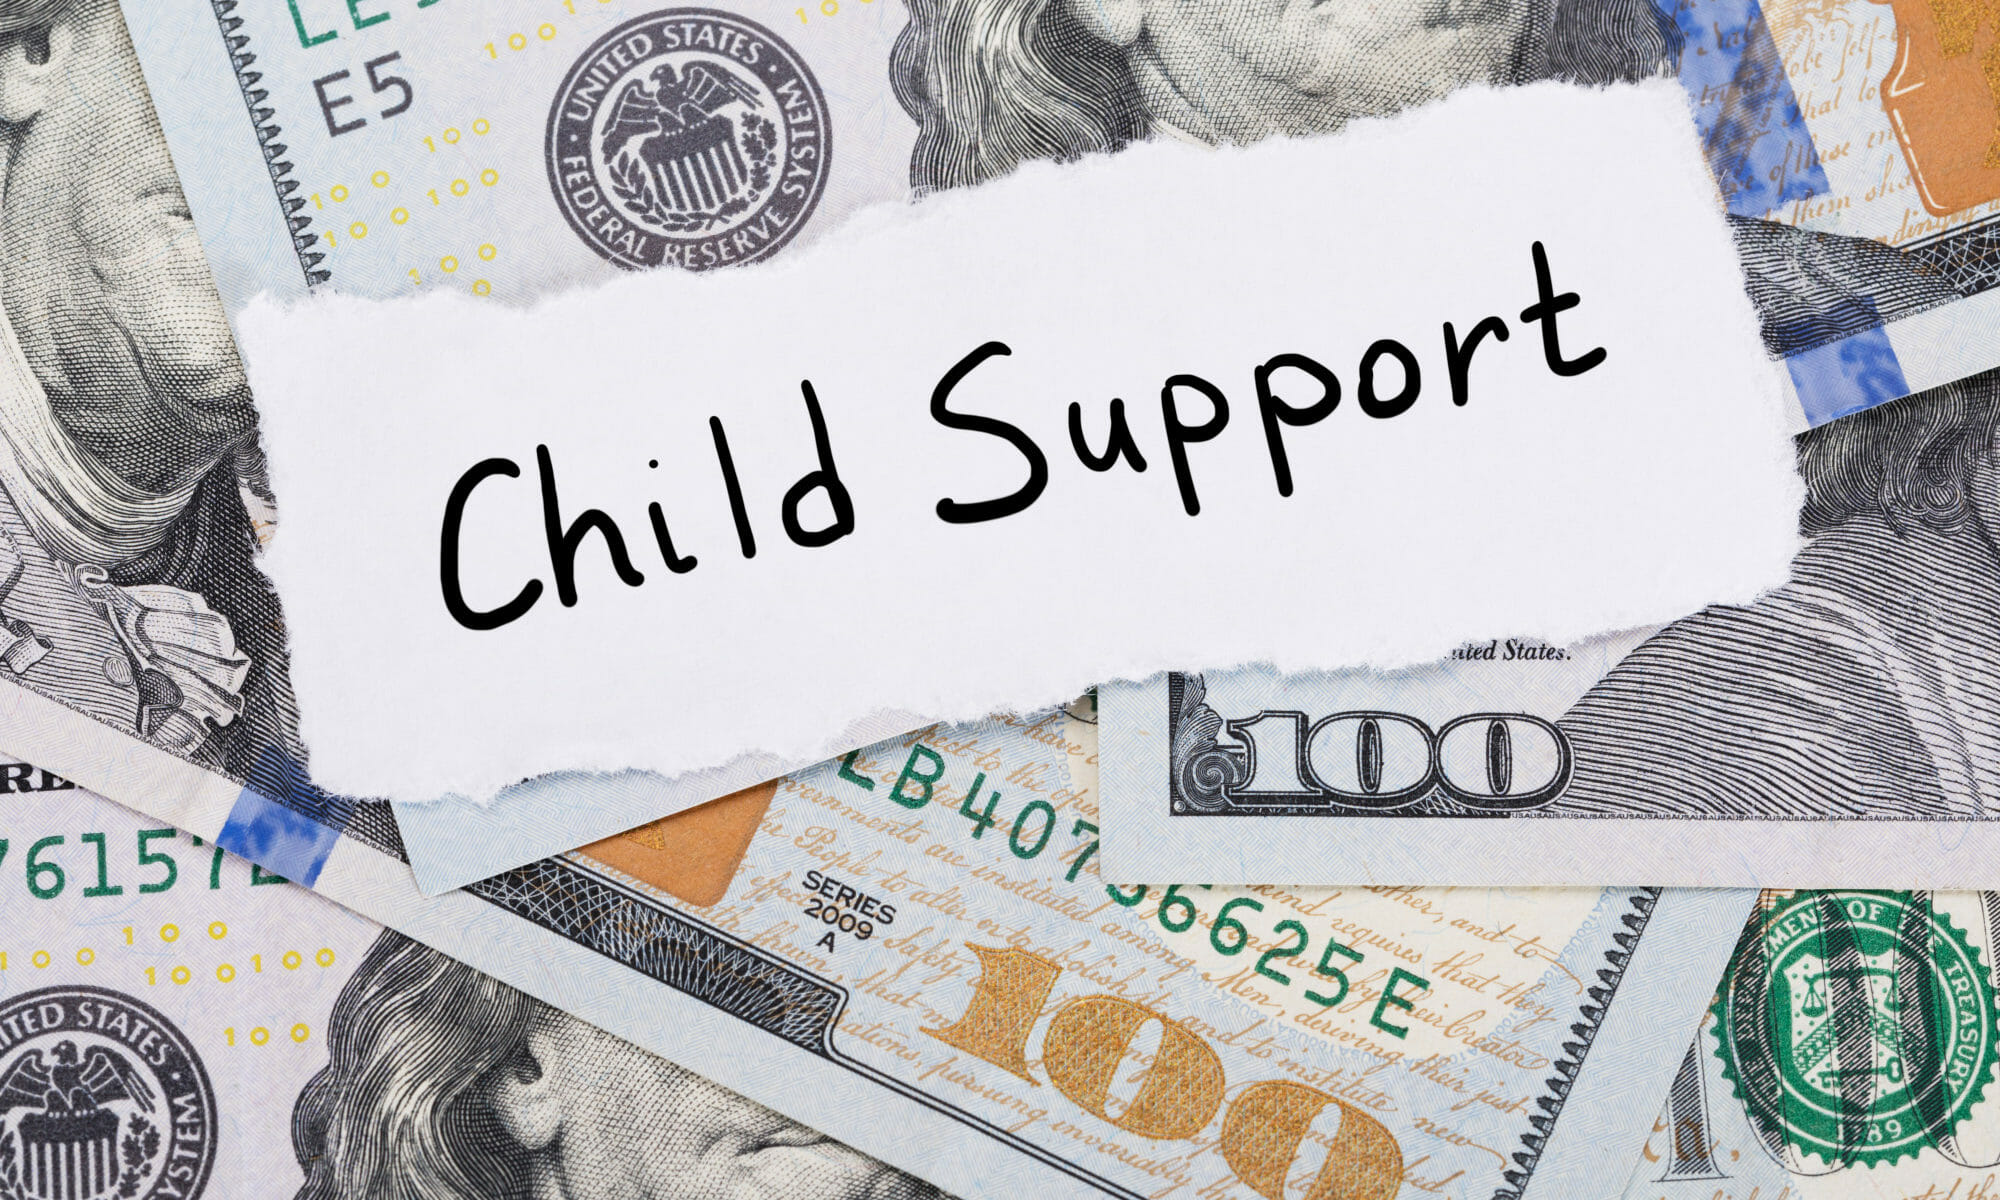 Child support payments